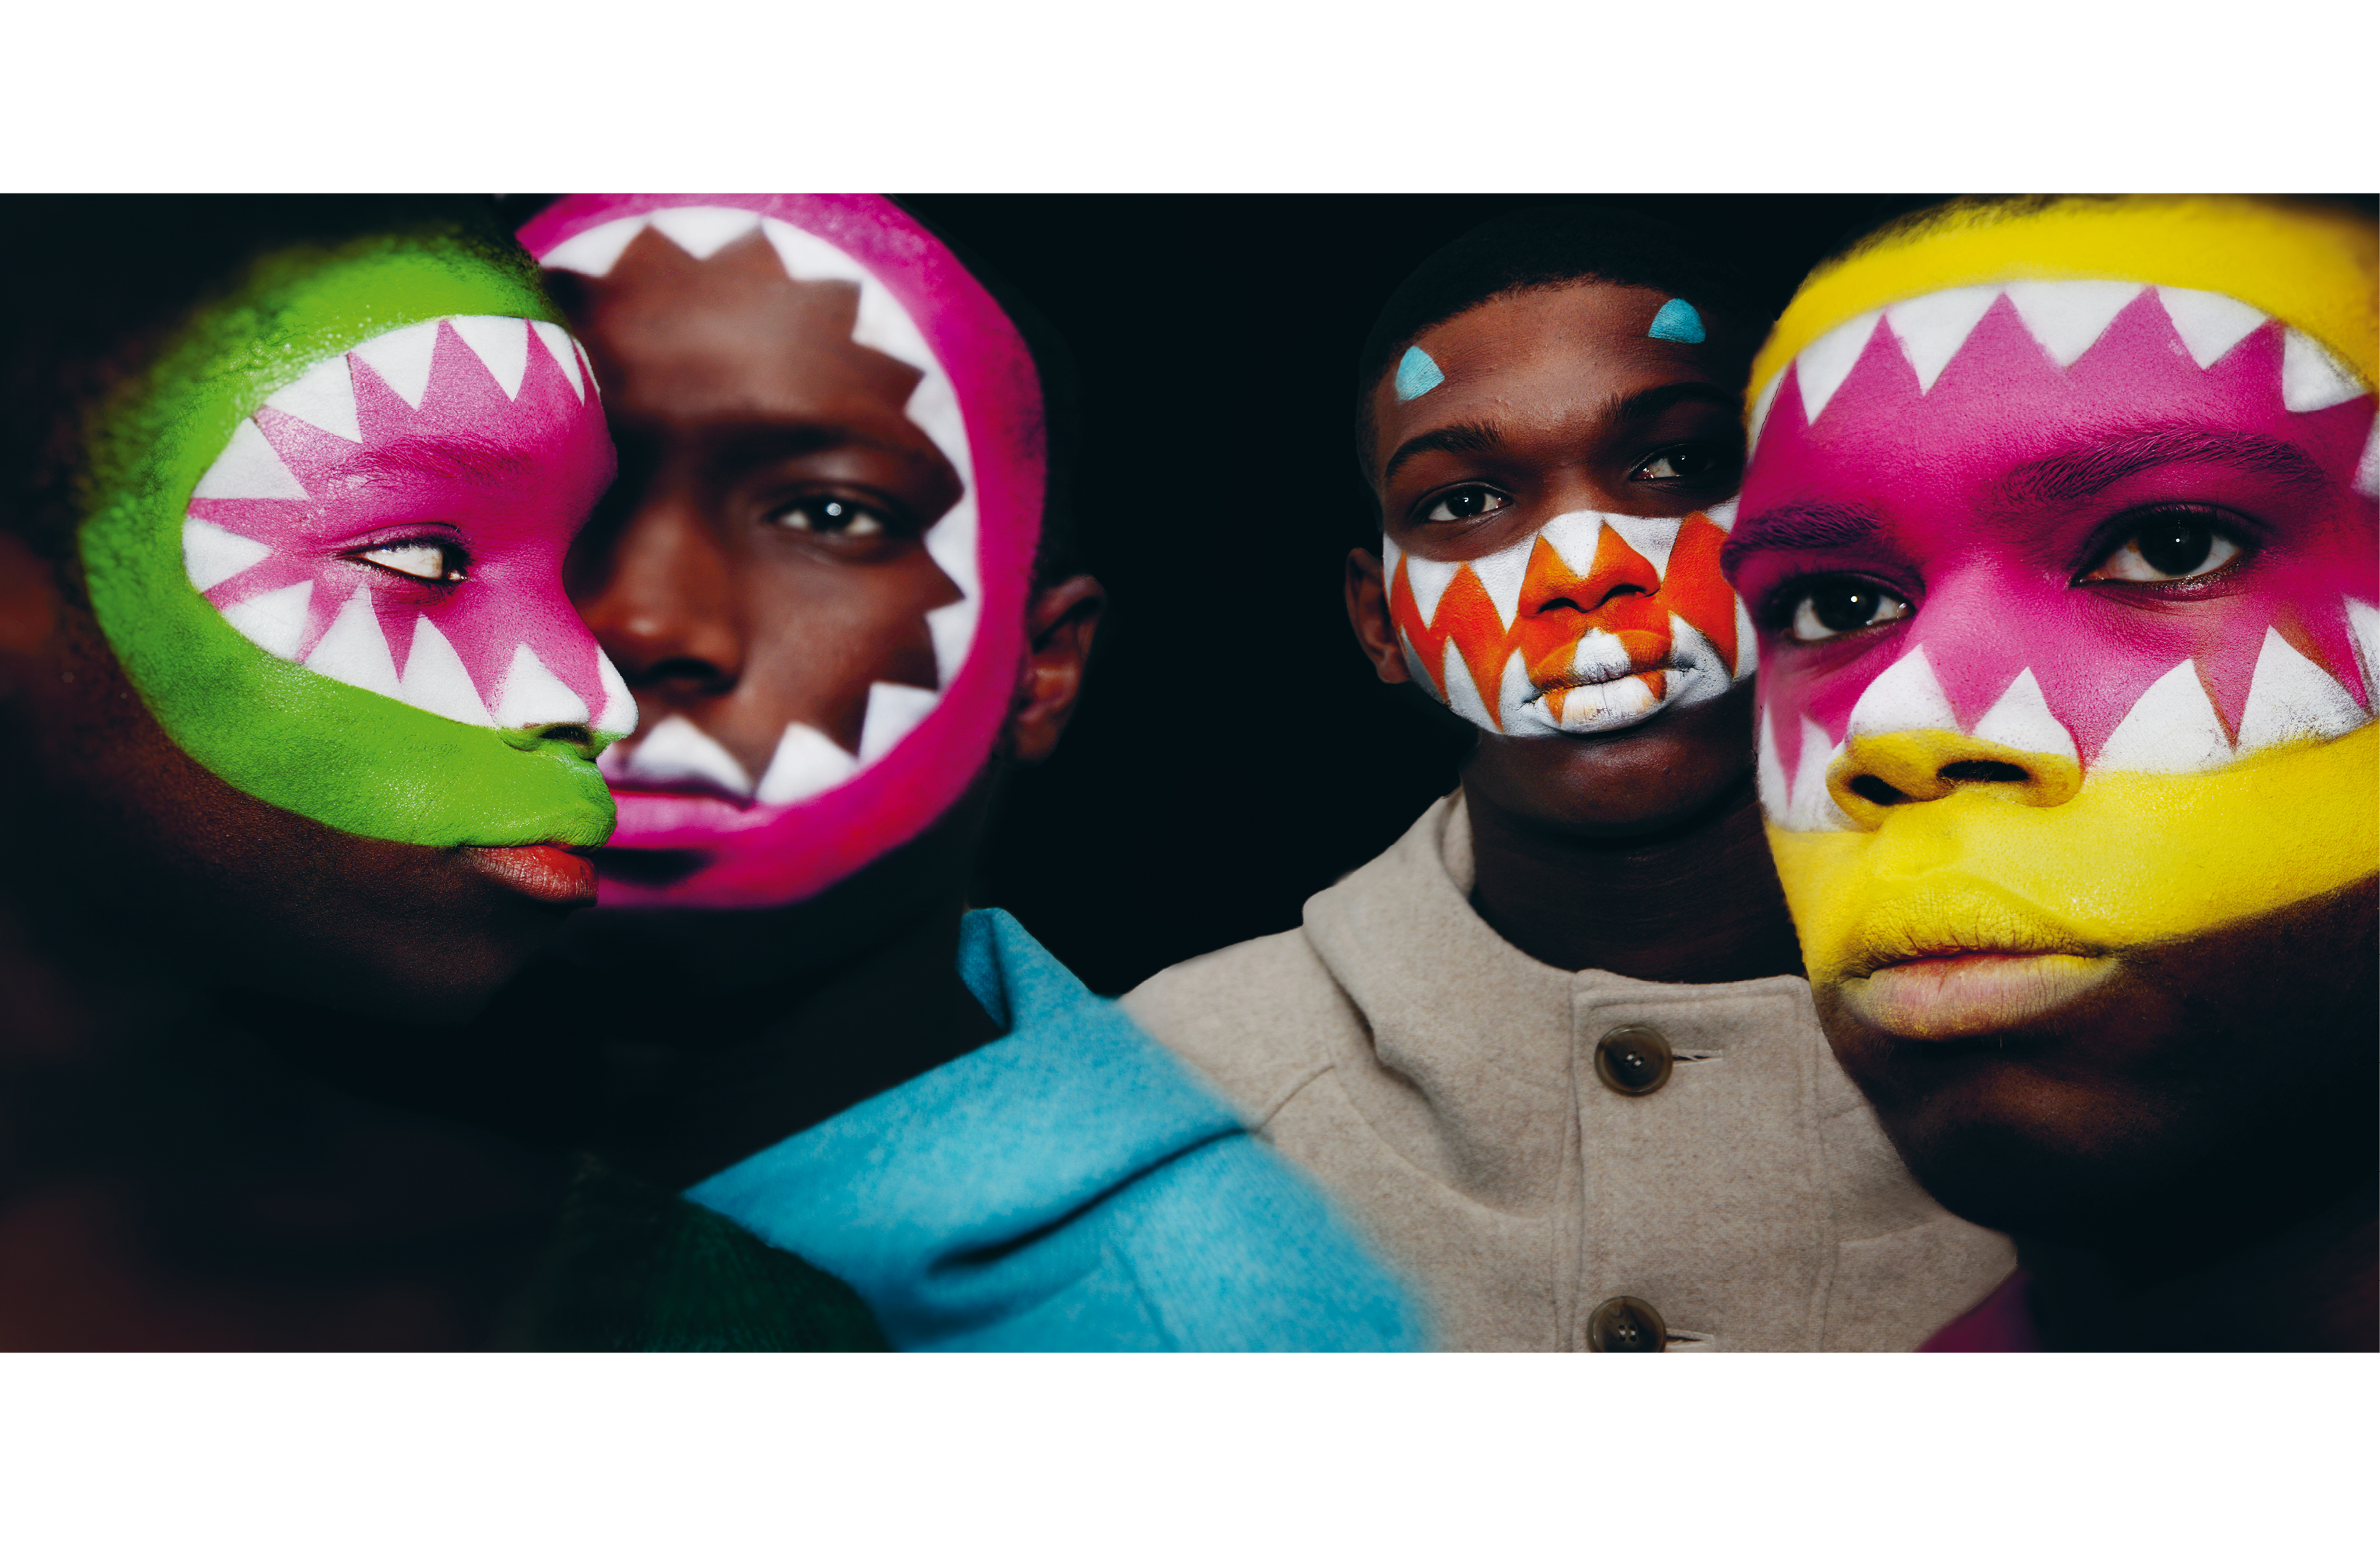 walter van beirendonck on the power, mystery and history of the mask